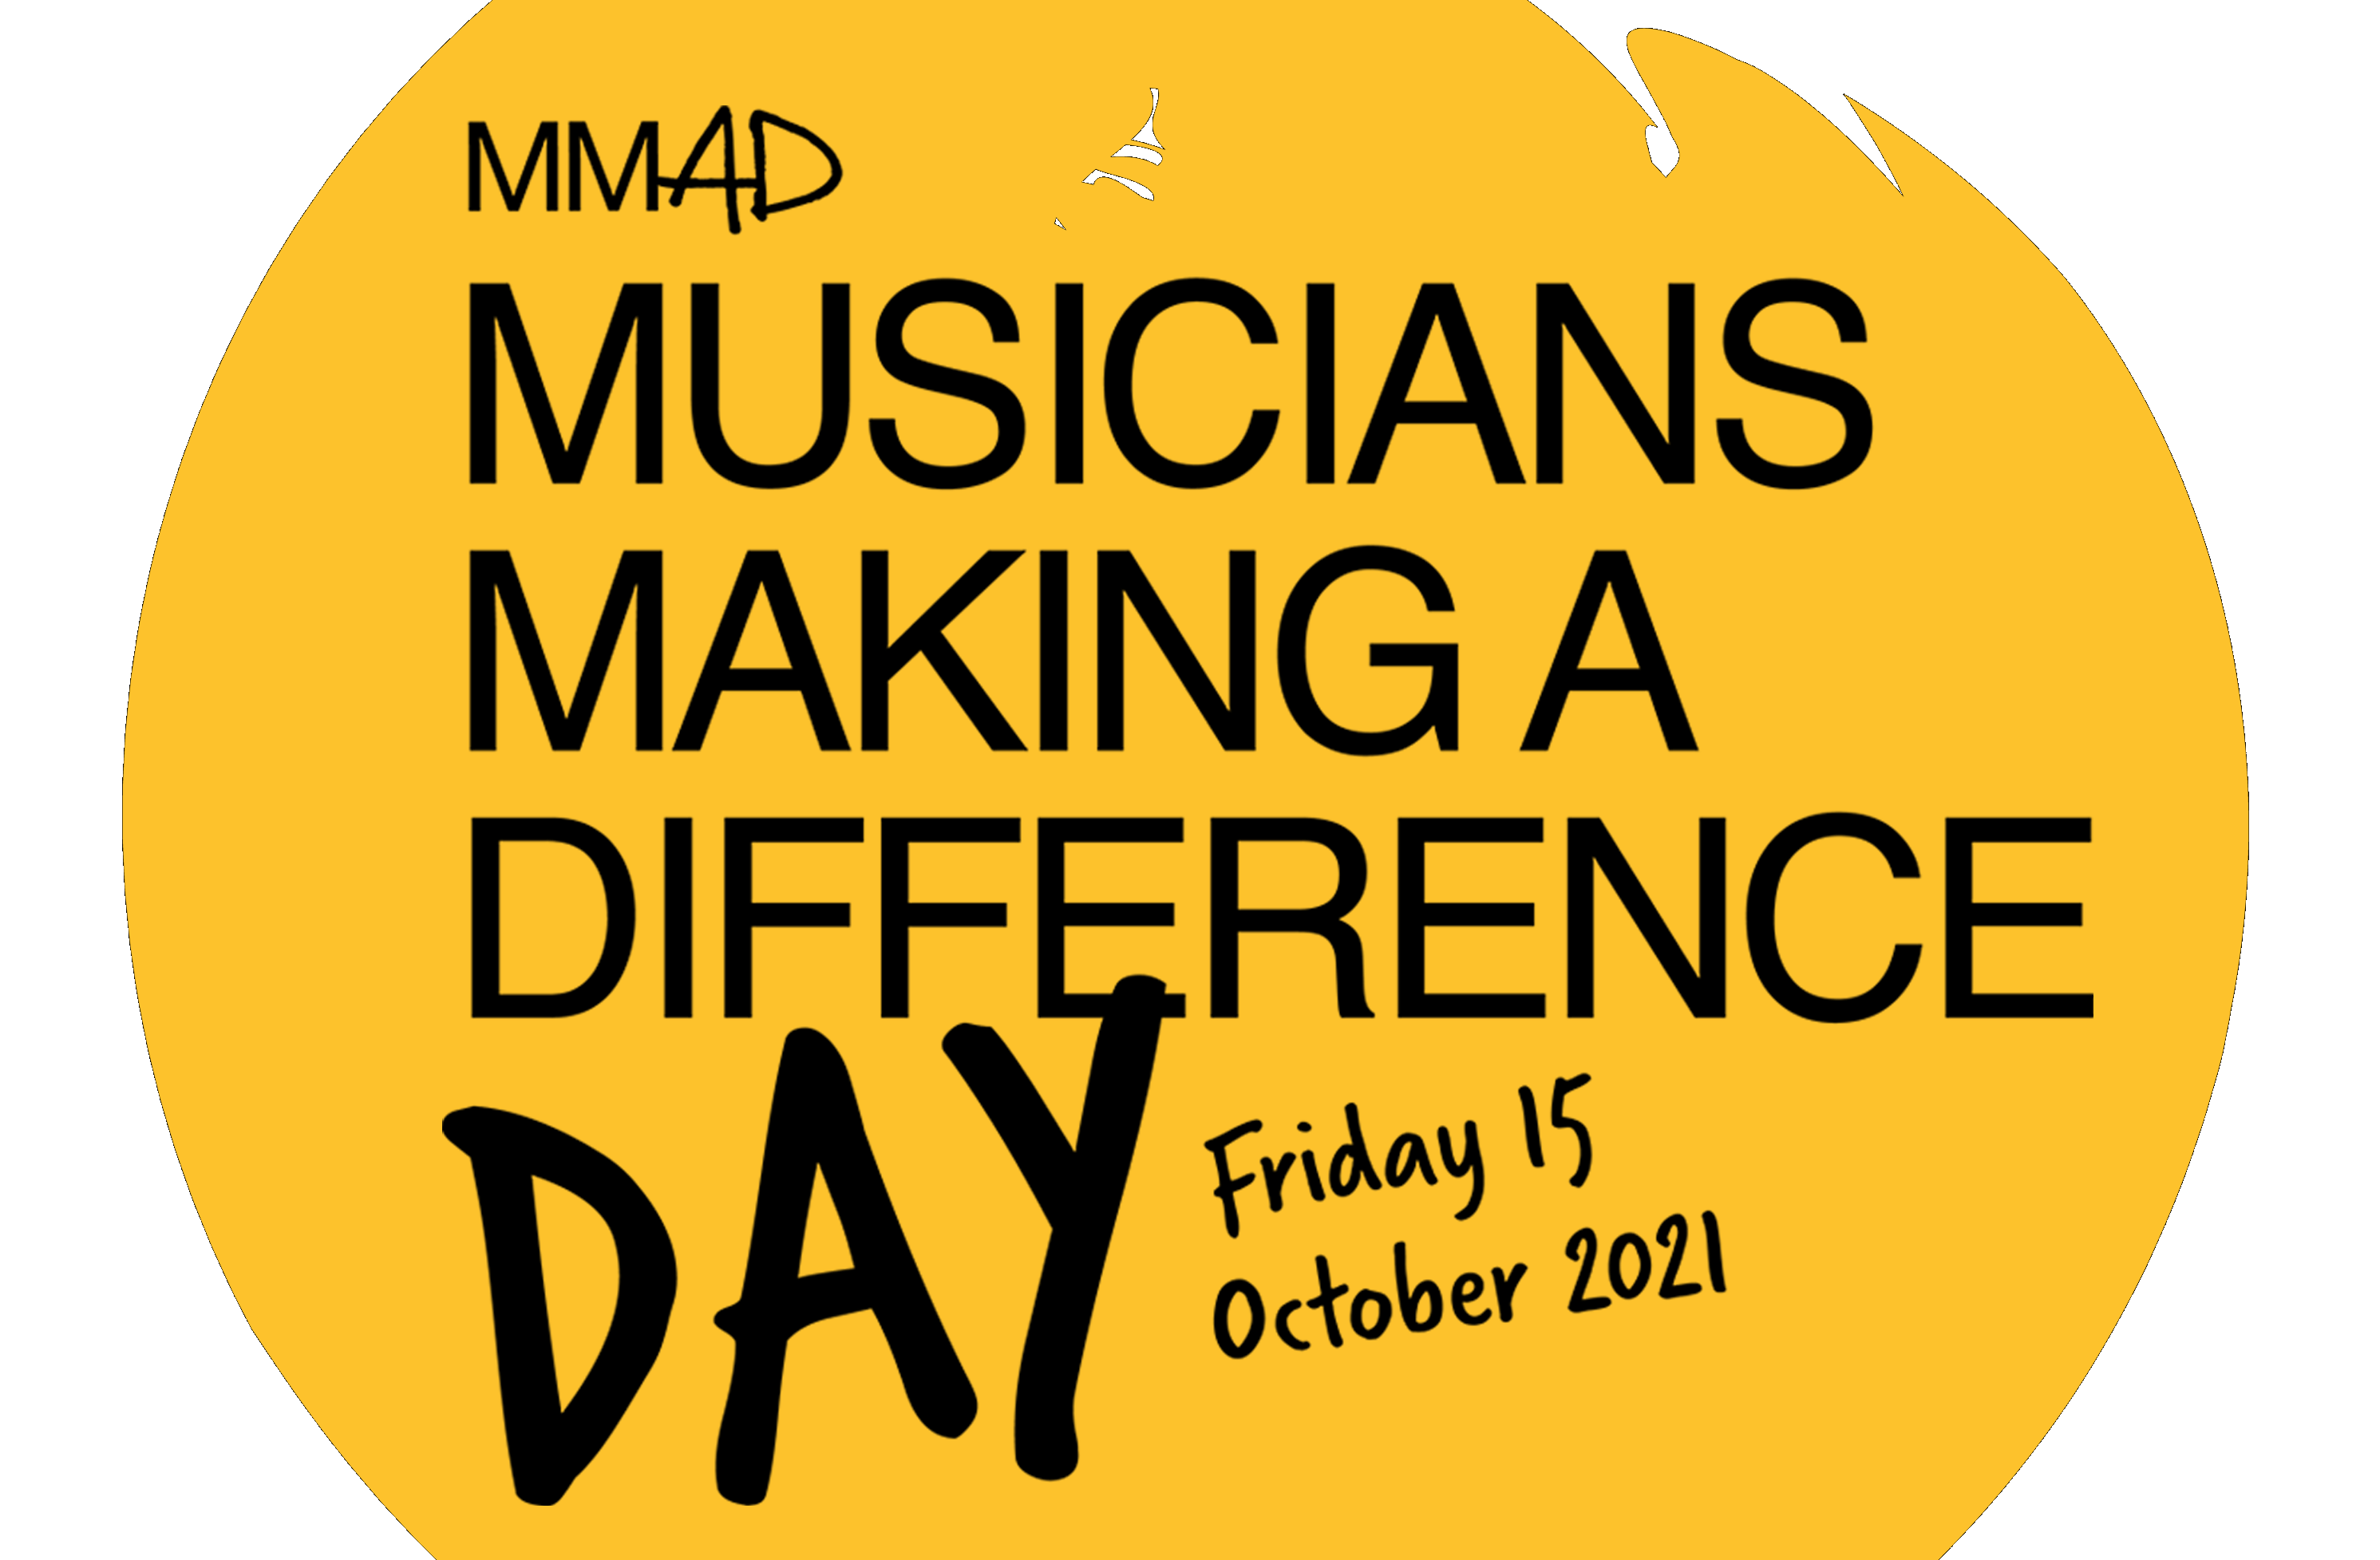 Local musos jump on board & support Musicians Making A Difference Day